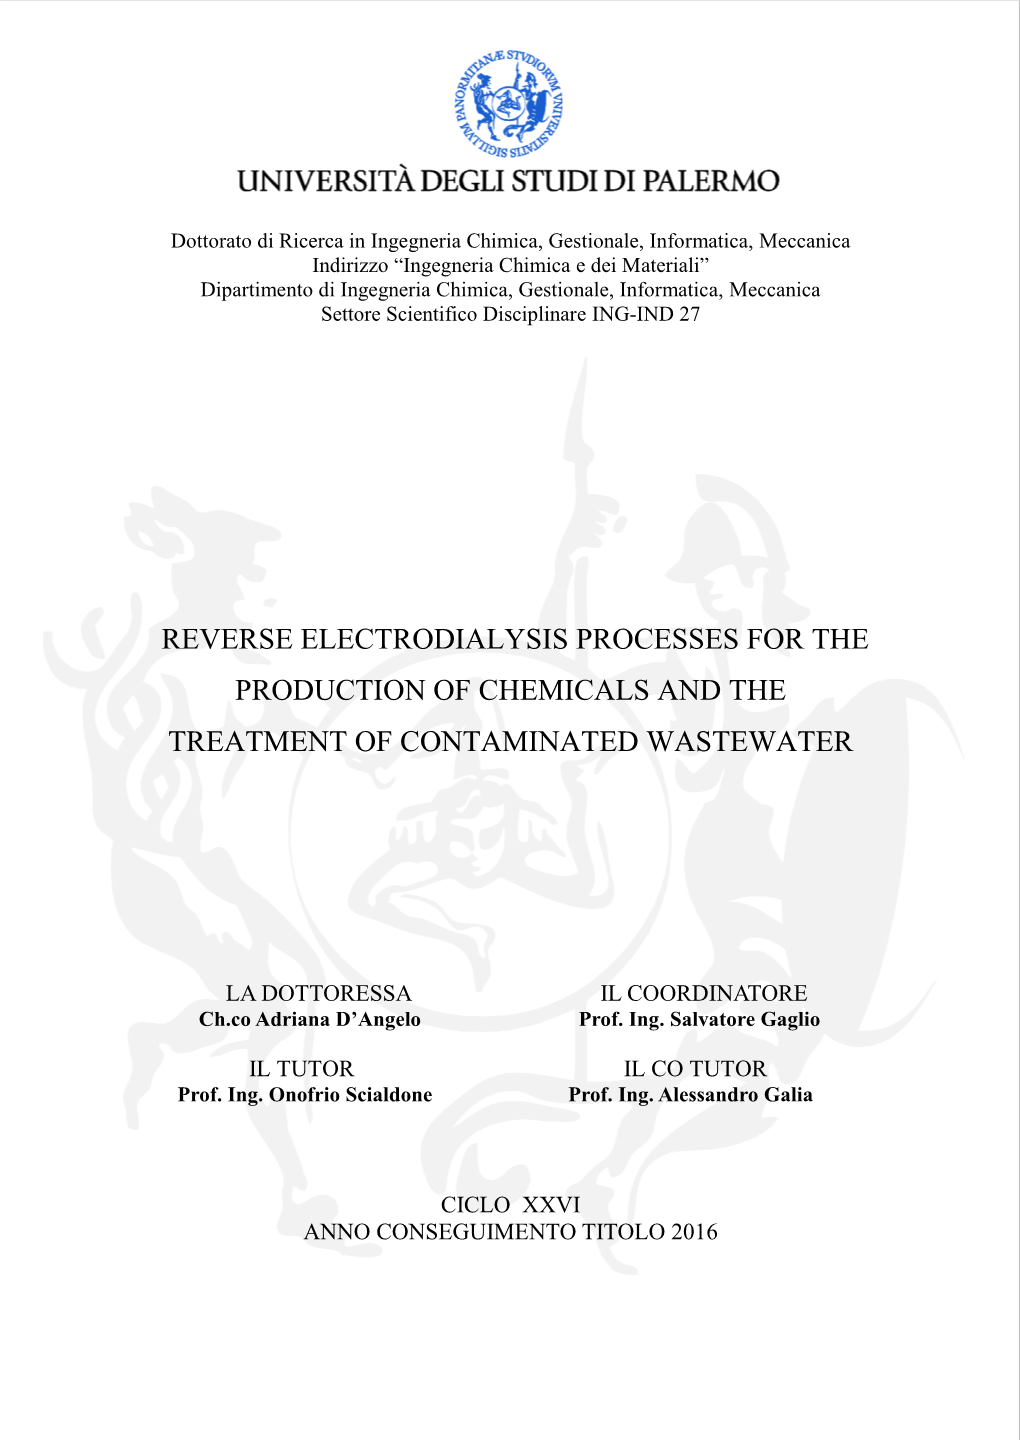 Reverse Electrodialysis Processes for the Production of Chemicals and the Treatment of Contaminated Wastewater